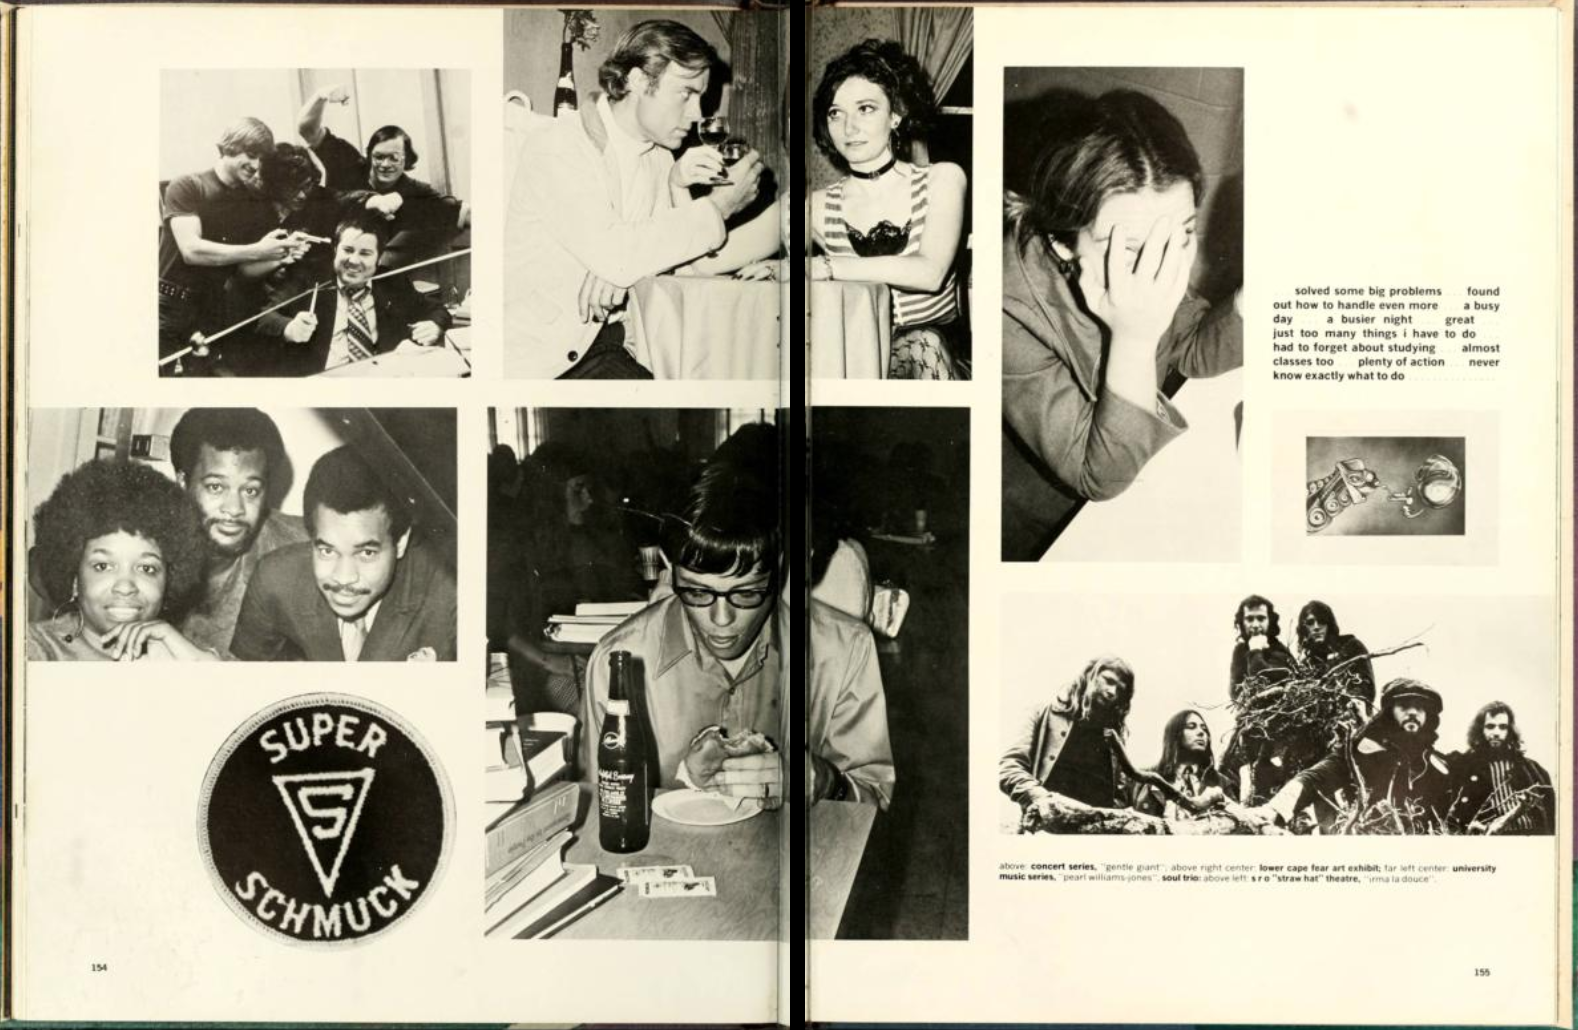 Two-page spread of the 1973 University of North Carolina at Wilmington yearbook, Fledgling. These two pages show candid photos from various events around the university as well as a patch that reads "super schmuck".